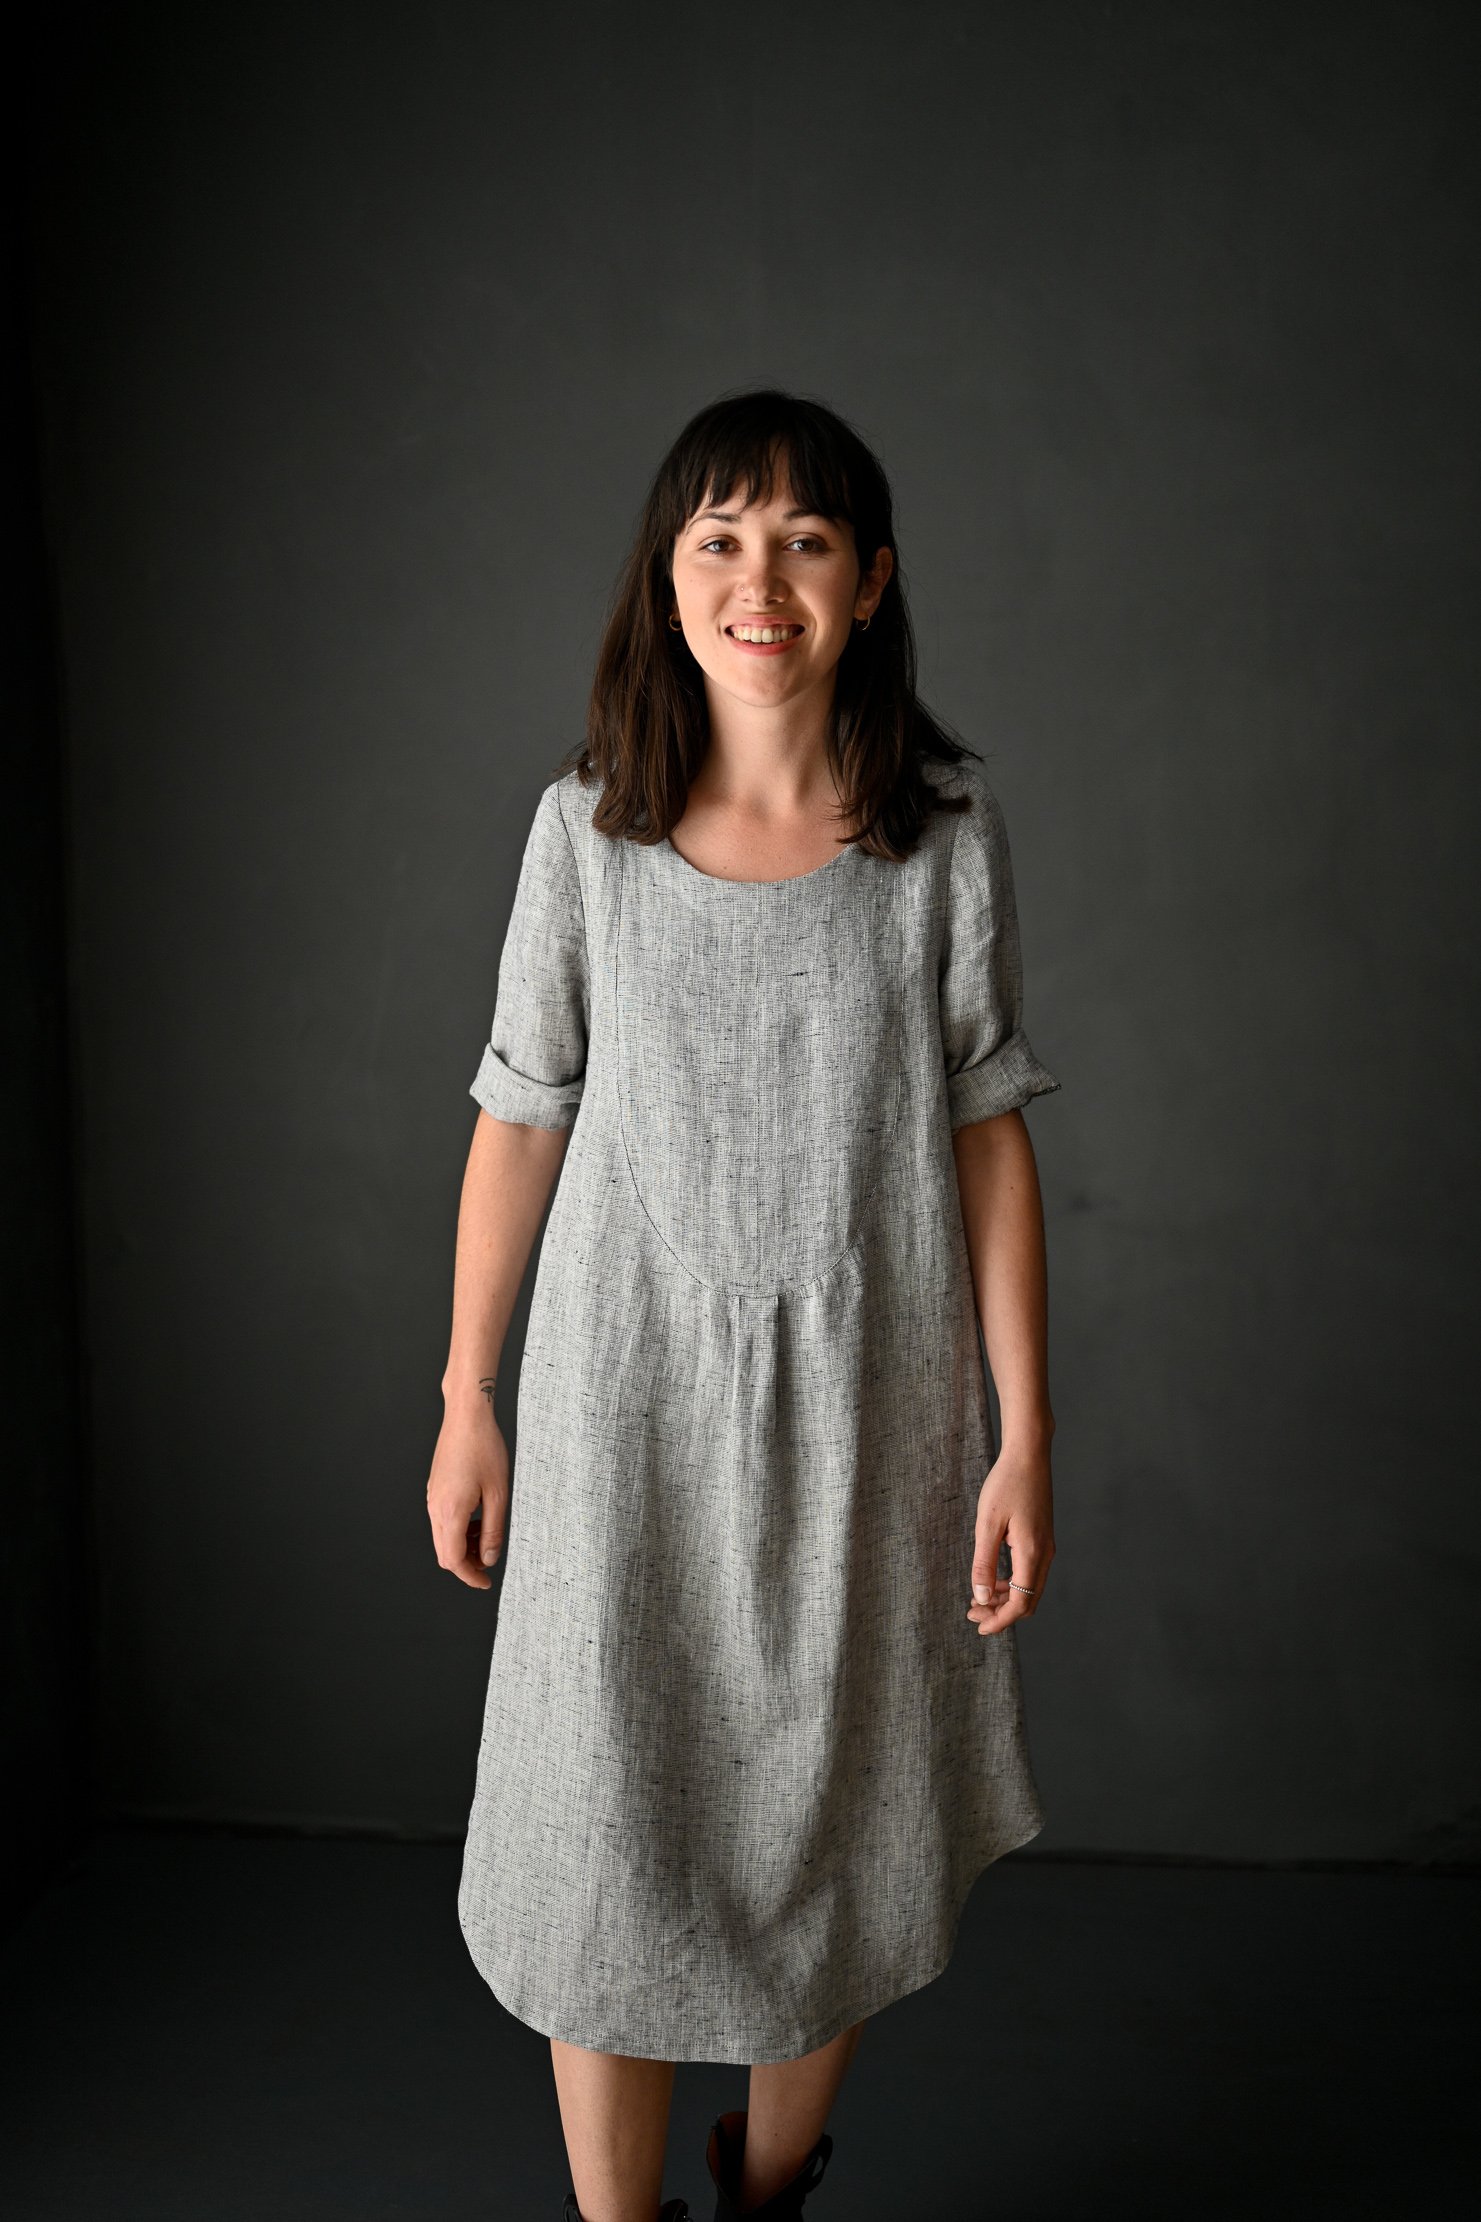 Woman wearing the Dress Shirt sewing pattern by Merchant and Mills. A dress pattern made in cotton, linen, lightweight denim, silk or corduroy fabric featuring elbow length rolled up sleeves, loose fit and round neckline.